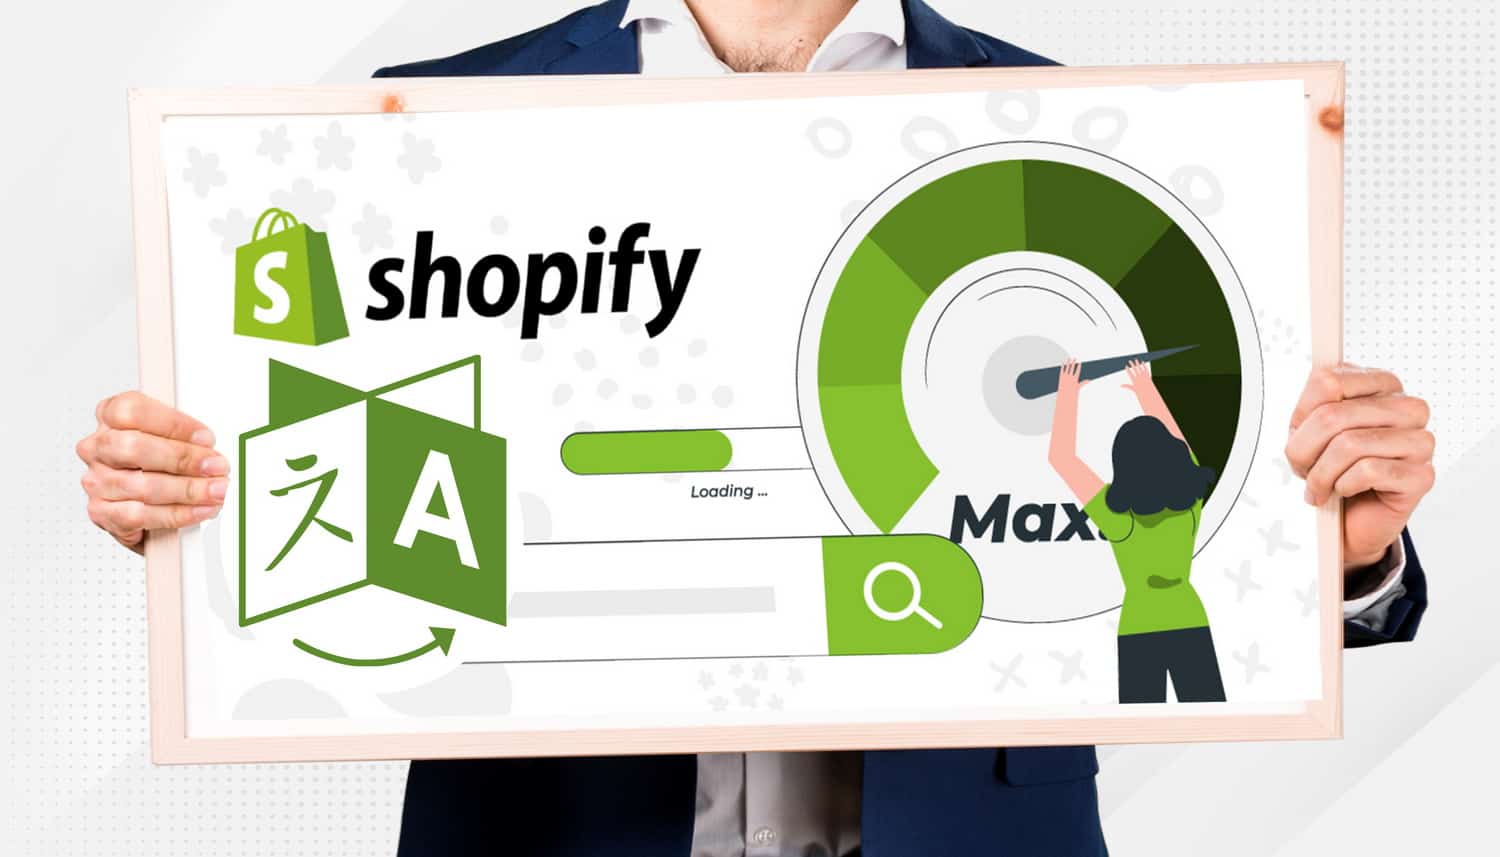 What You Need to Know Before Translating Your Shopify Store